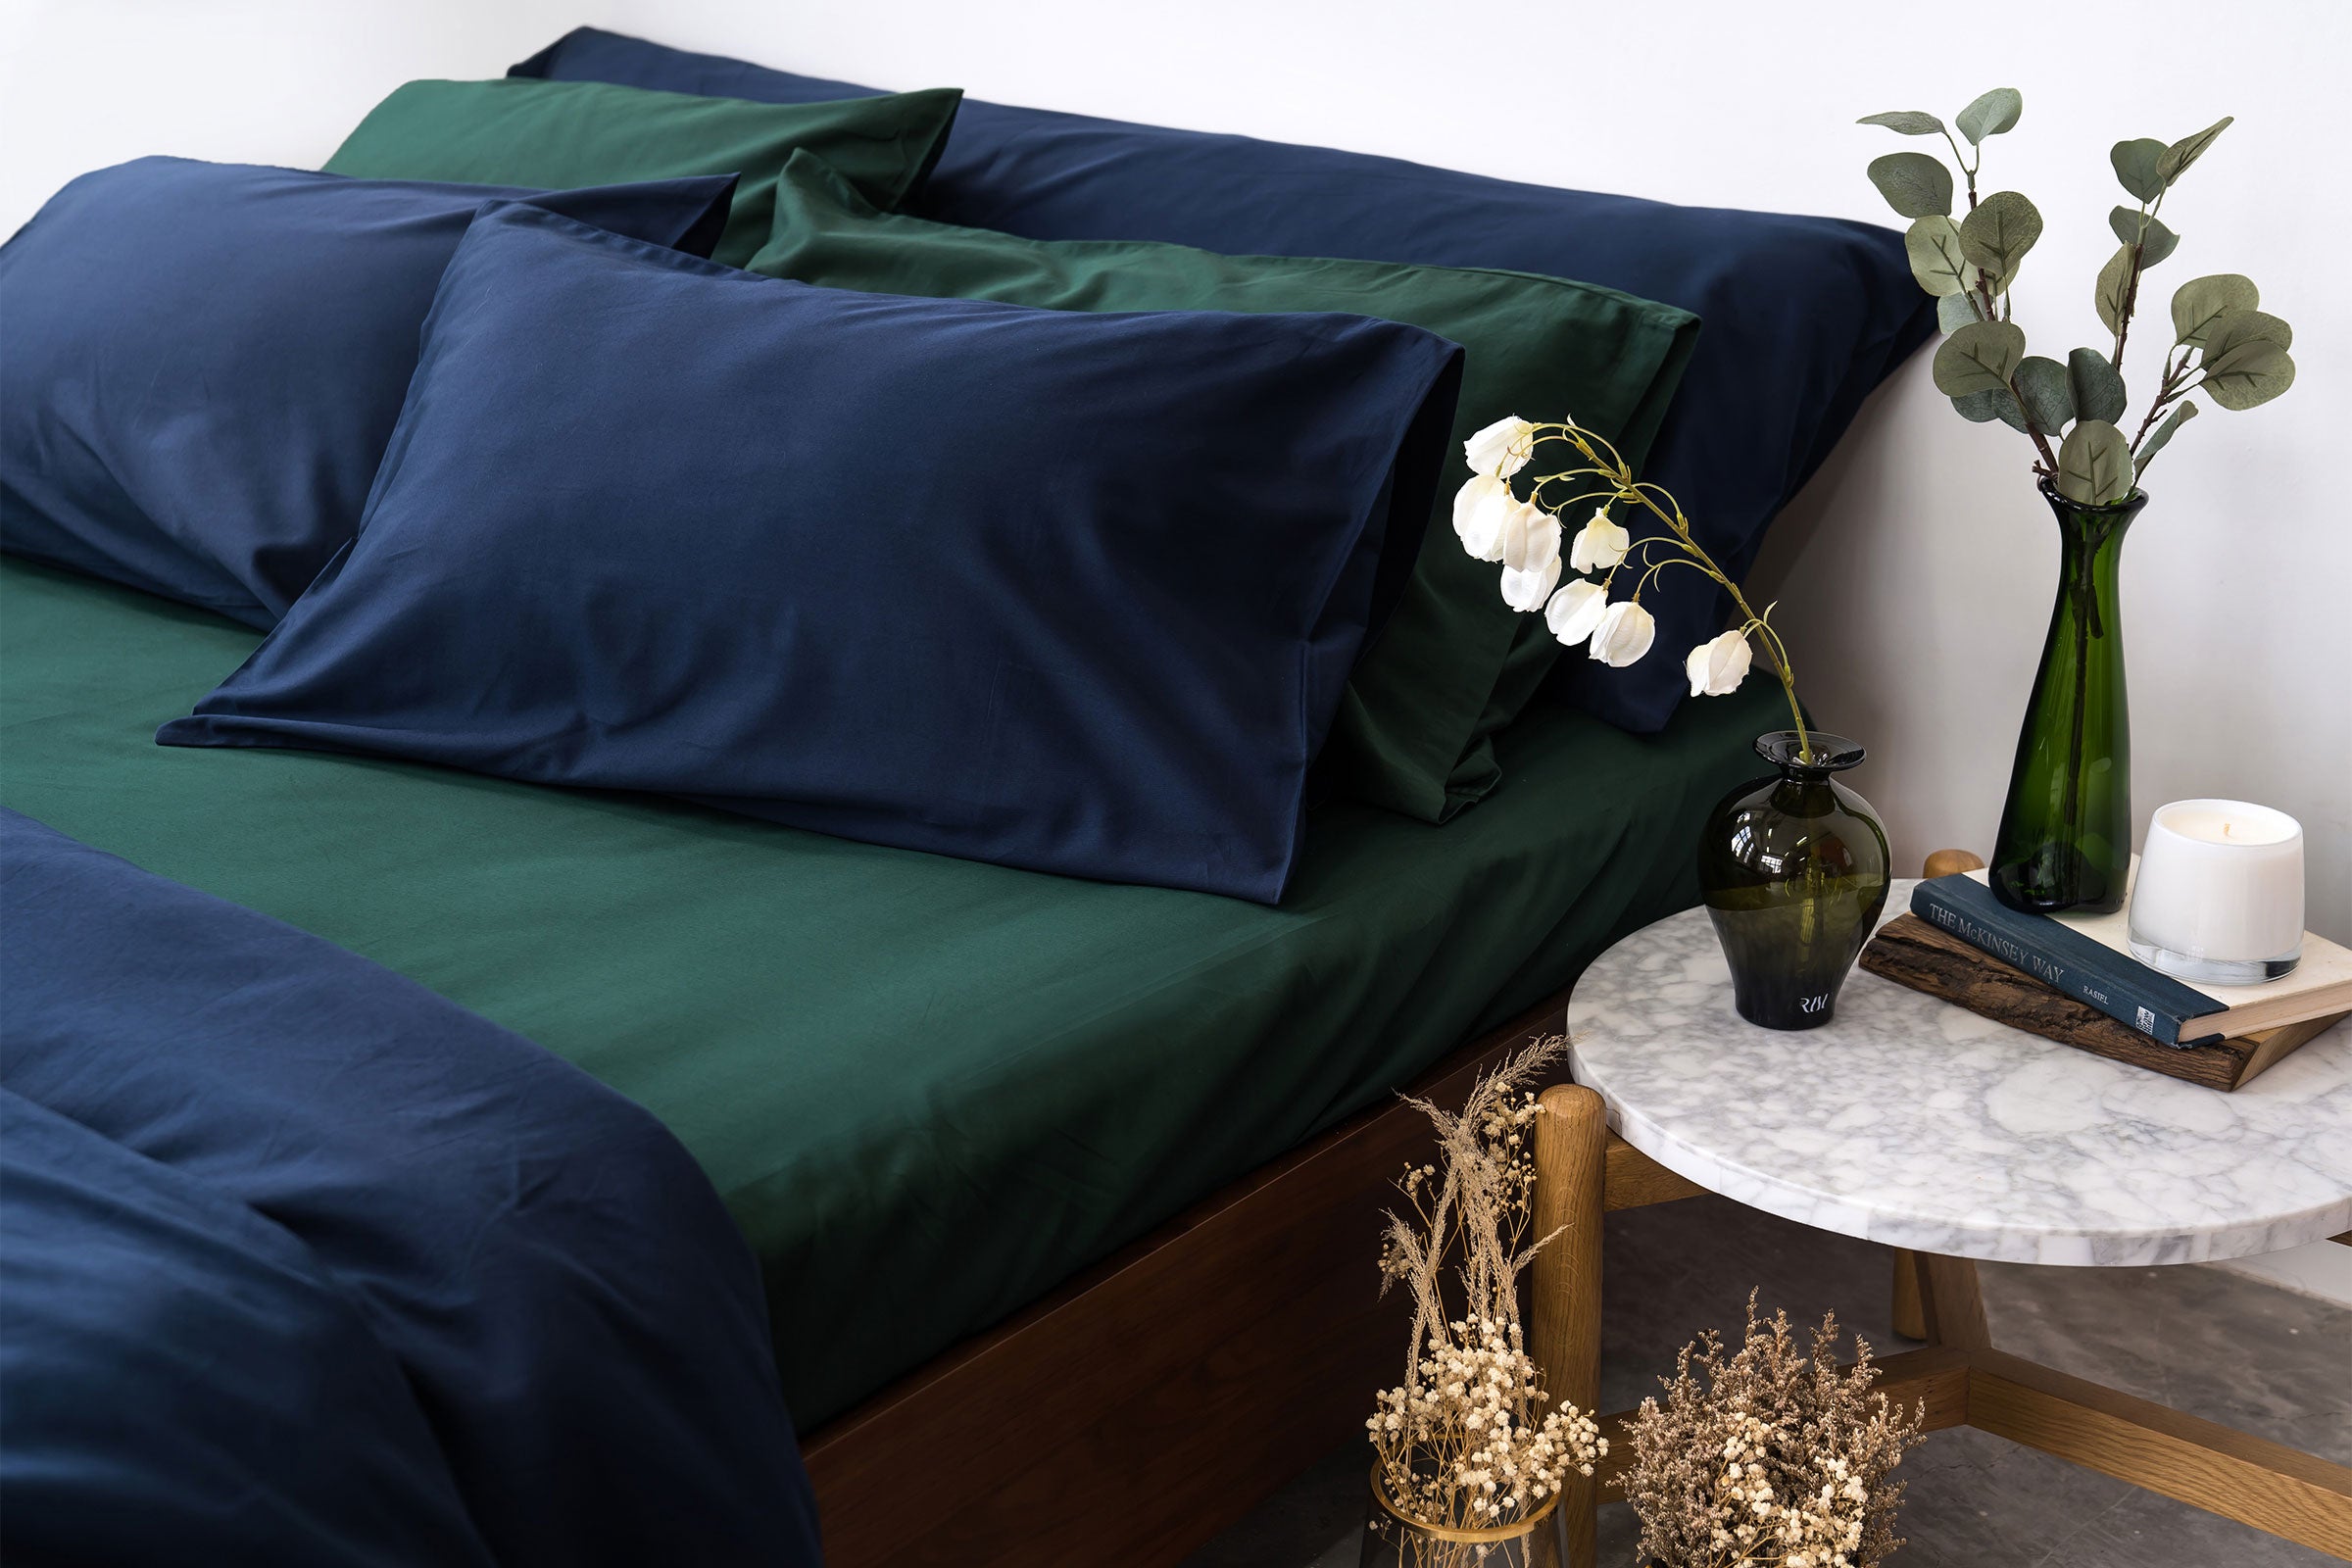 classic-forest-fitted-sheet-pillowcase-pair-navy-duvet-cover-pillowcase-pair-body-pillow-by-sojao.jpg